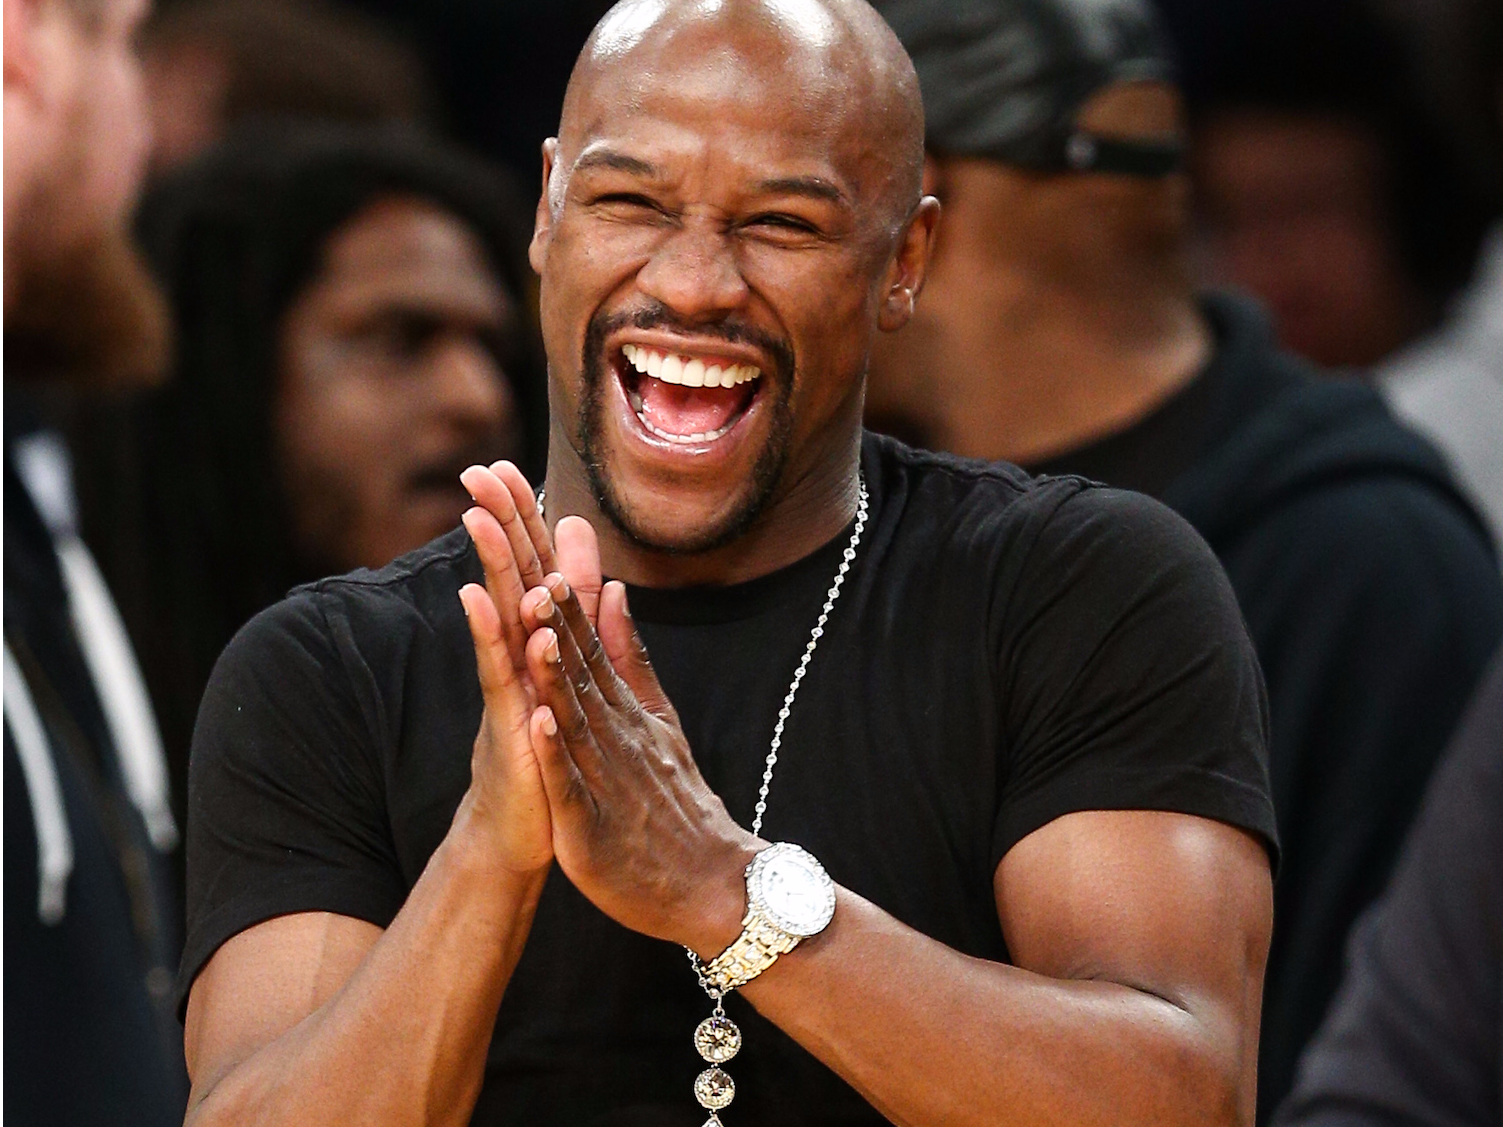 floyd-mayweather-is-promoting-another-initial-coin-offering-you-can-call-me-floyd-crypto-mayweather.jpg